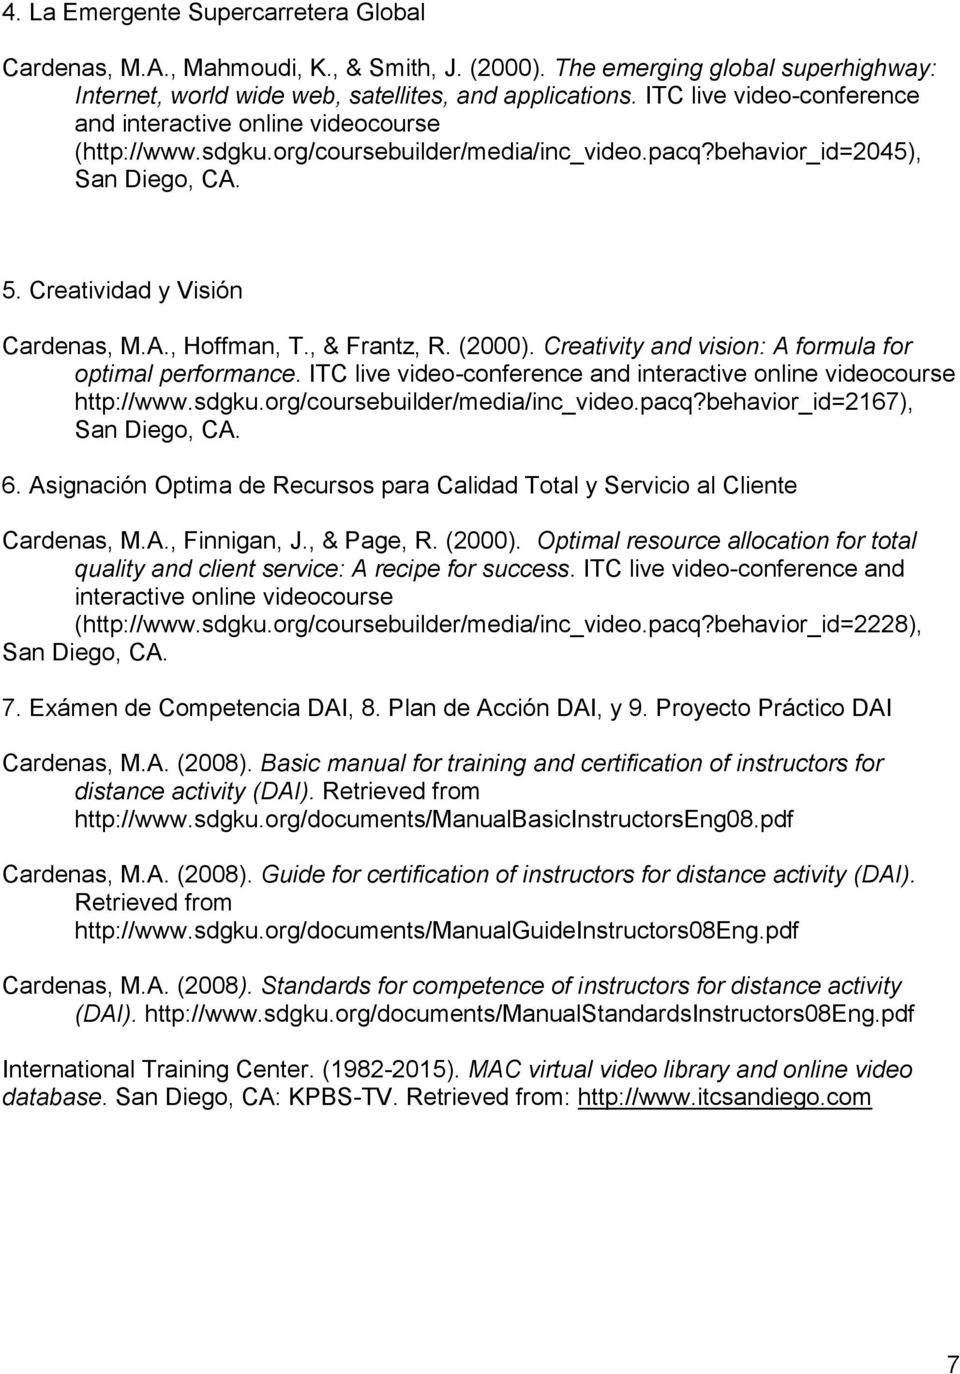 , & Frantz, R. (2000). Creativity and vision: A formula for optimal performance. ITC live video-conference and interactive online videocourse http://www.sdgku.org/coursebuilder/media/inc_video.pacq?